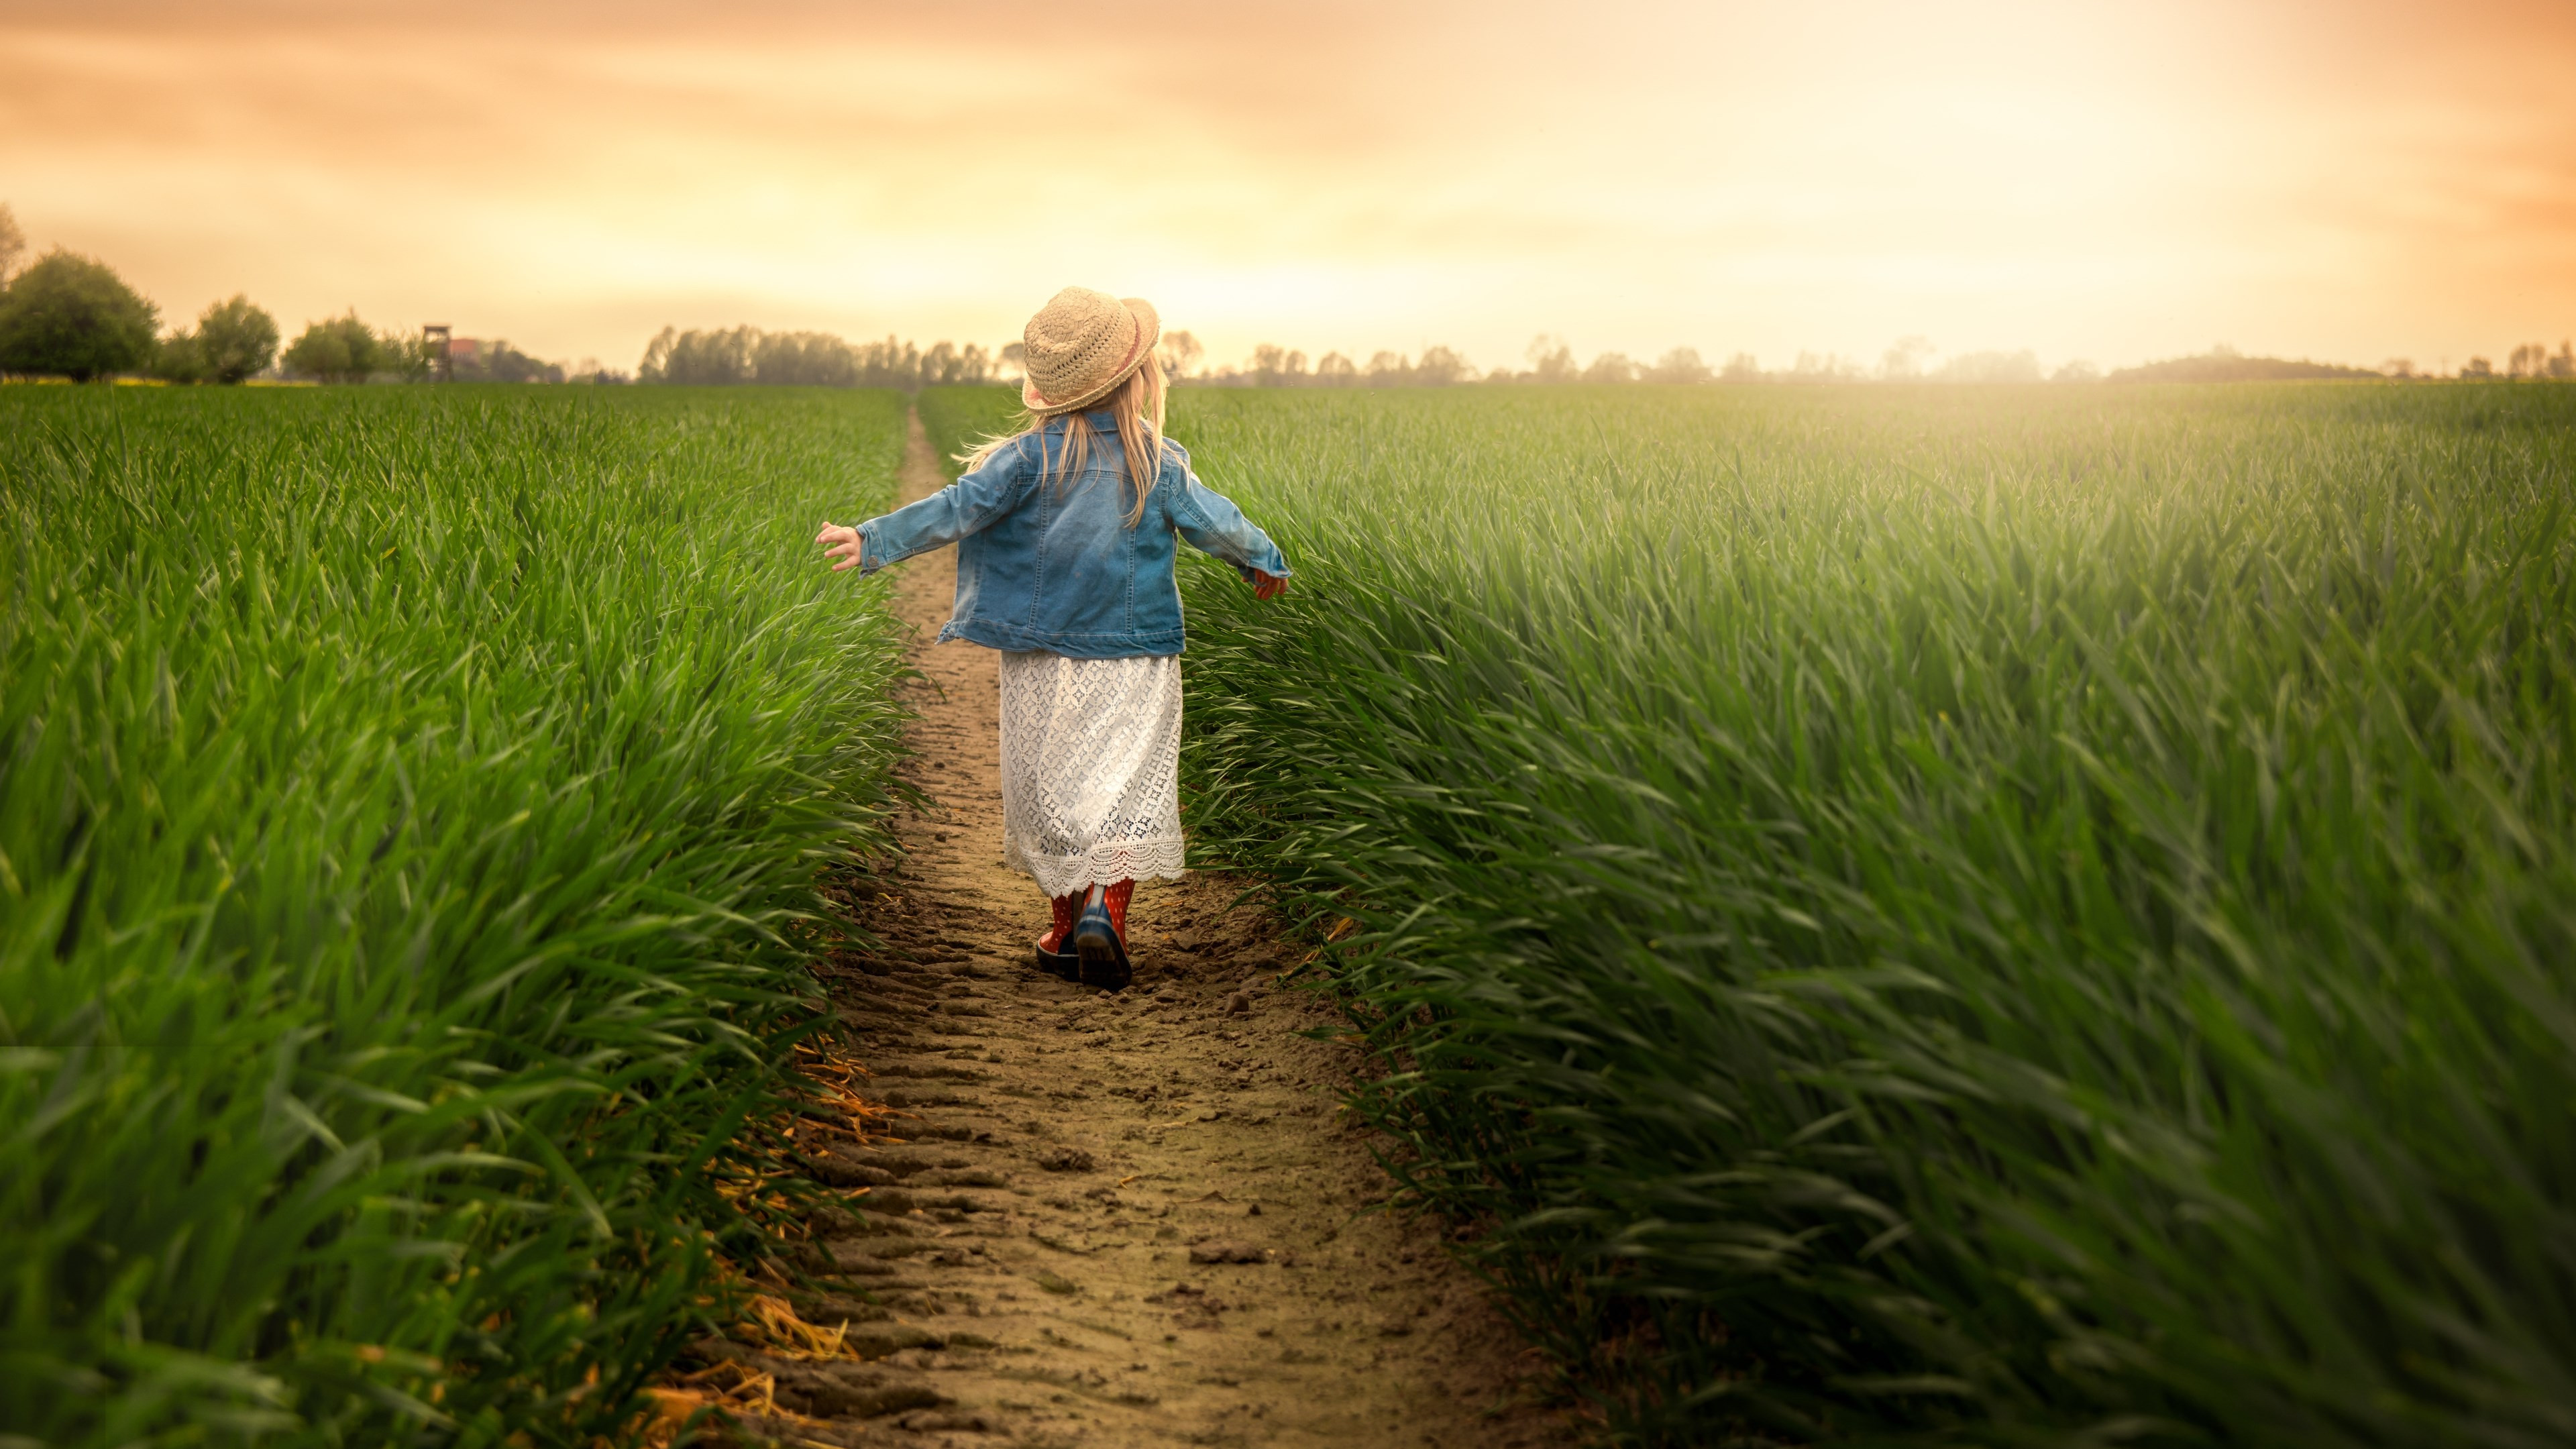 Child in the green field at sunset wallpaper 3840x2160